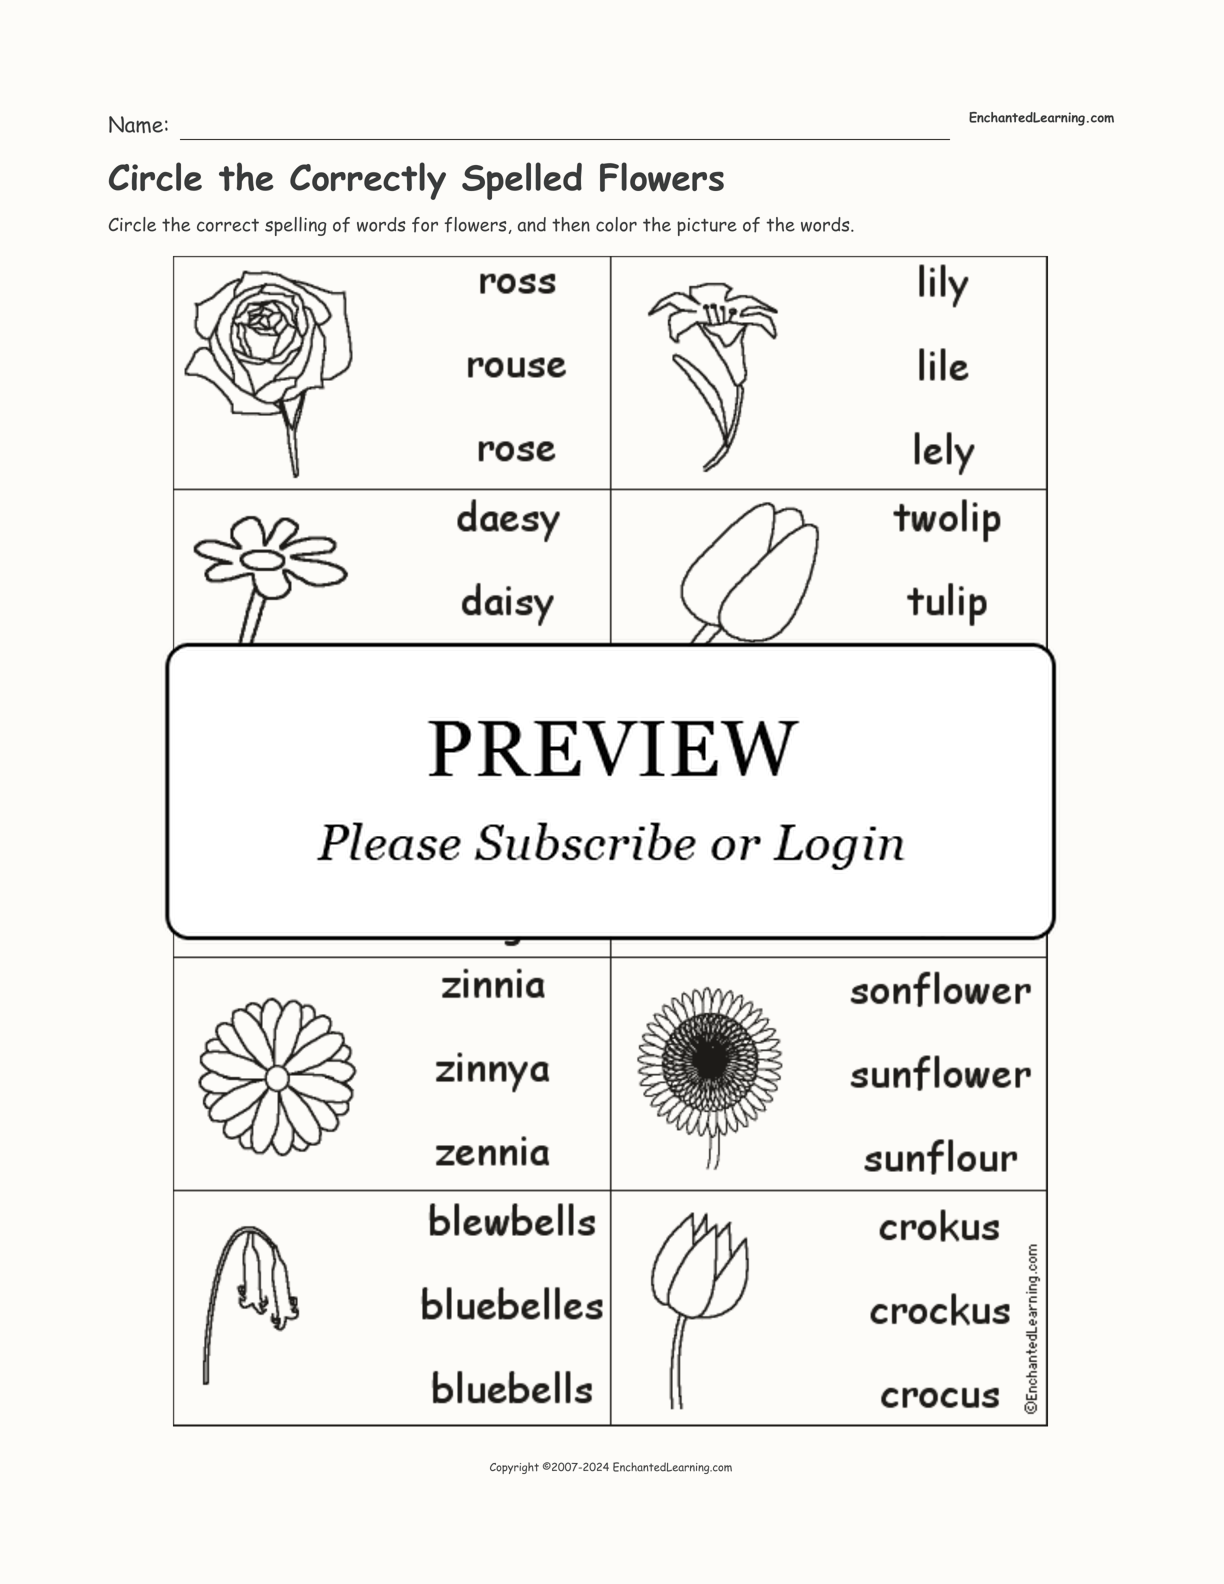 Circle the Correctly Spelled Flowers interactive worksheet page 1